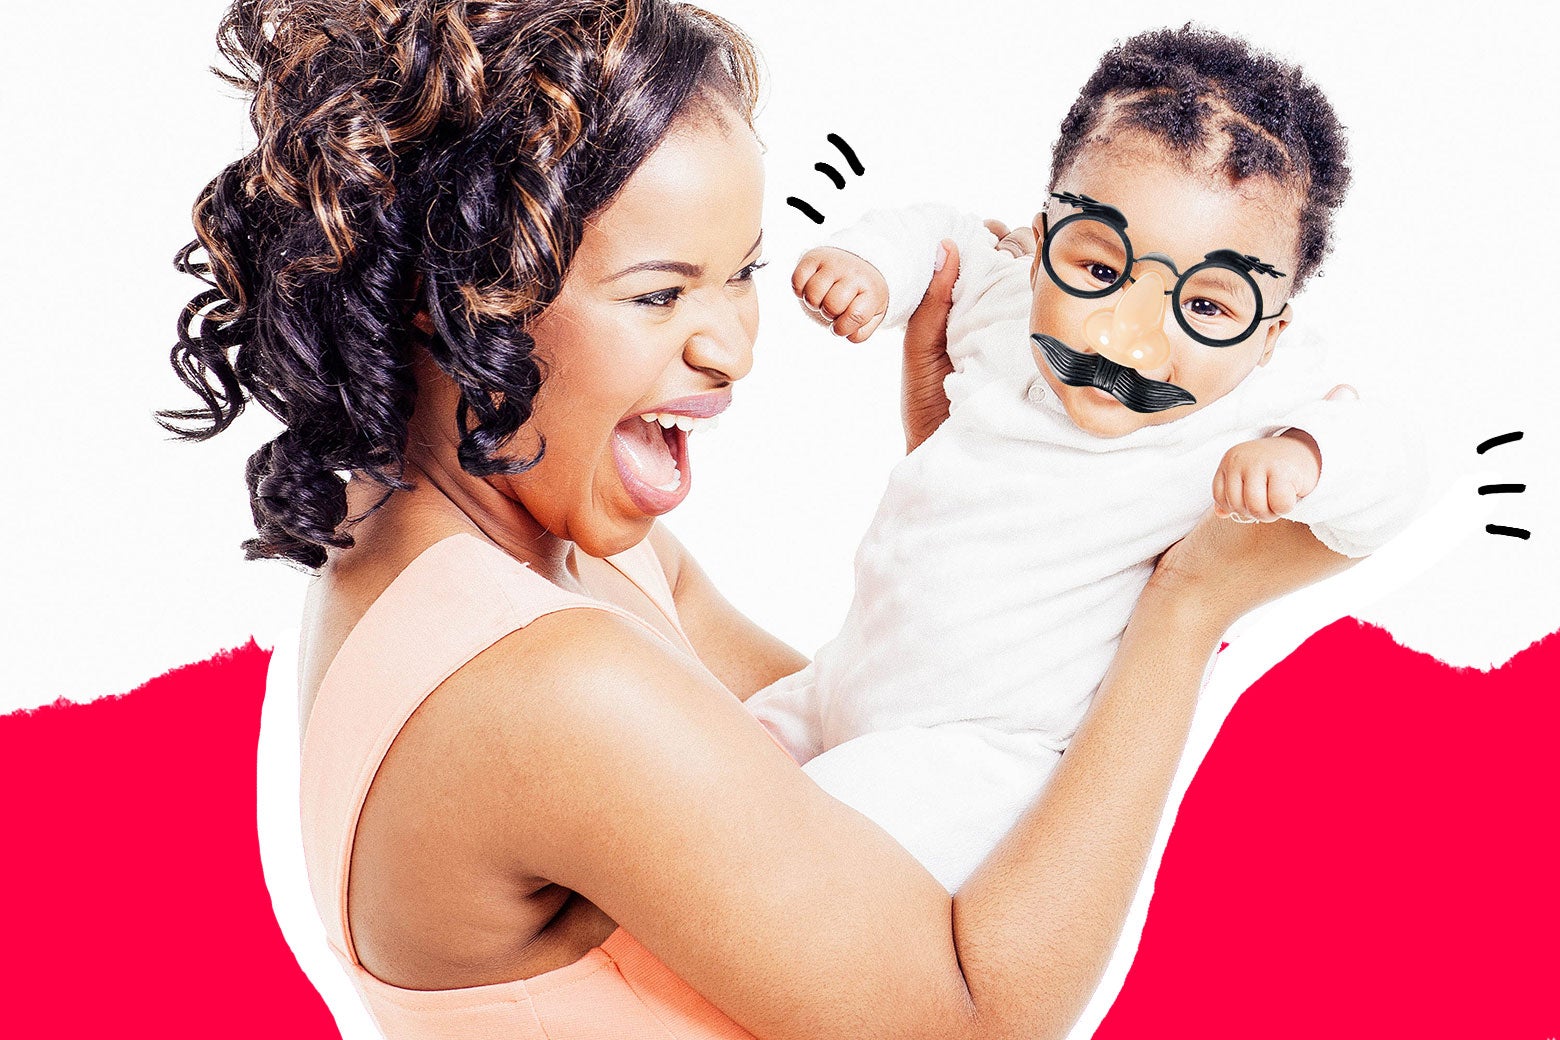 Woman caring for an infant. Infant is wearing silly glasses and laughing.